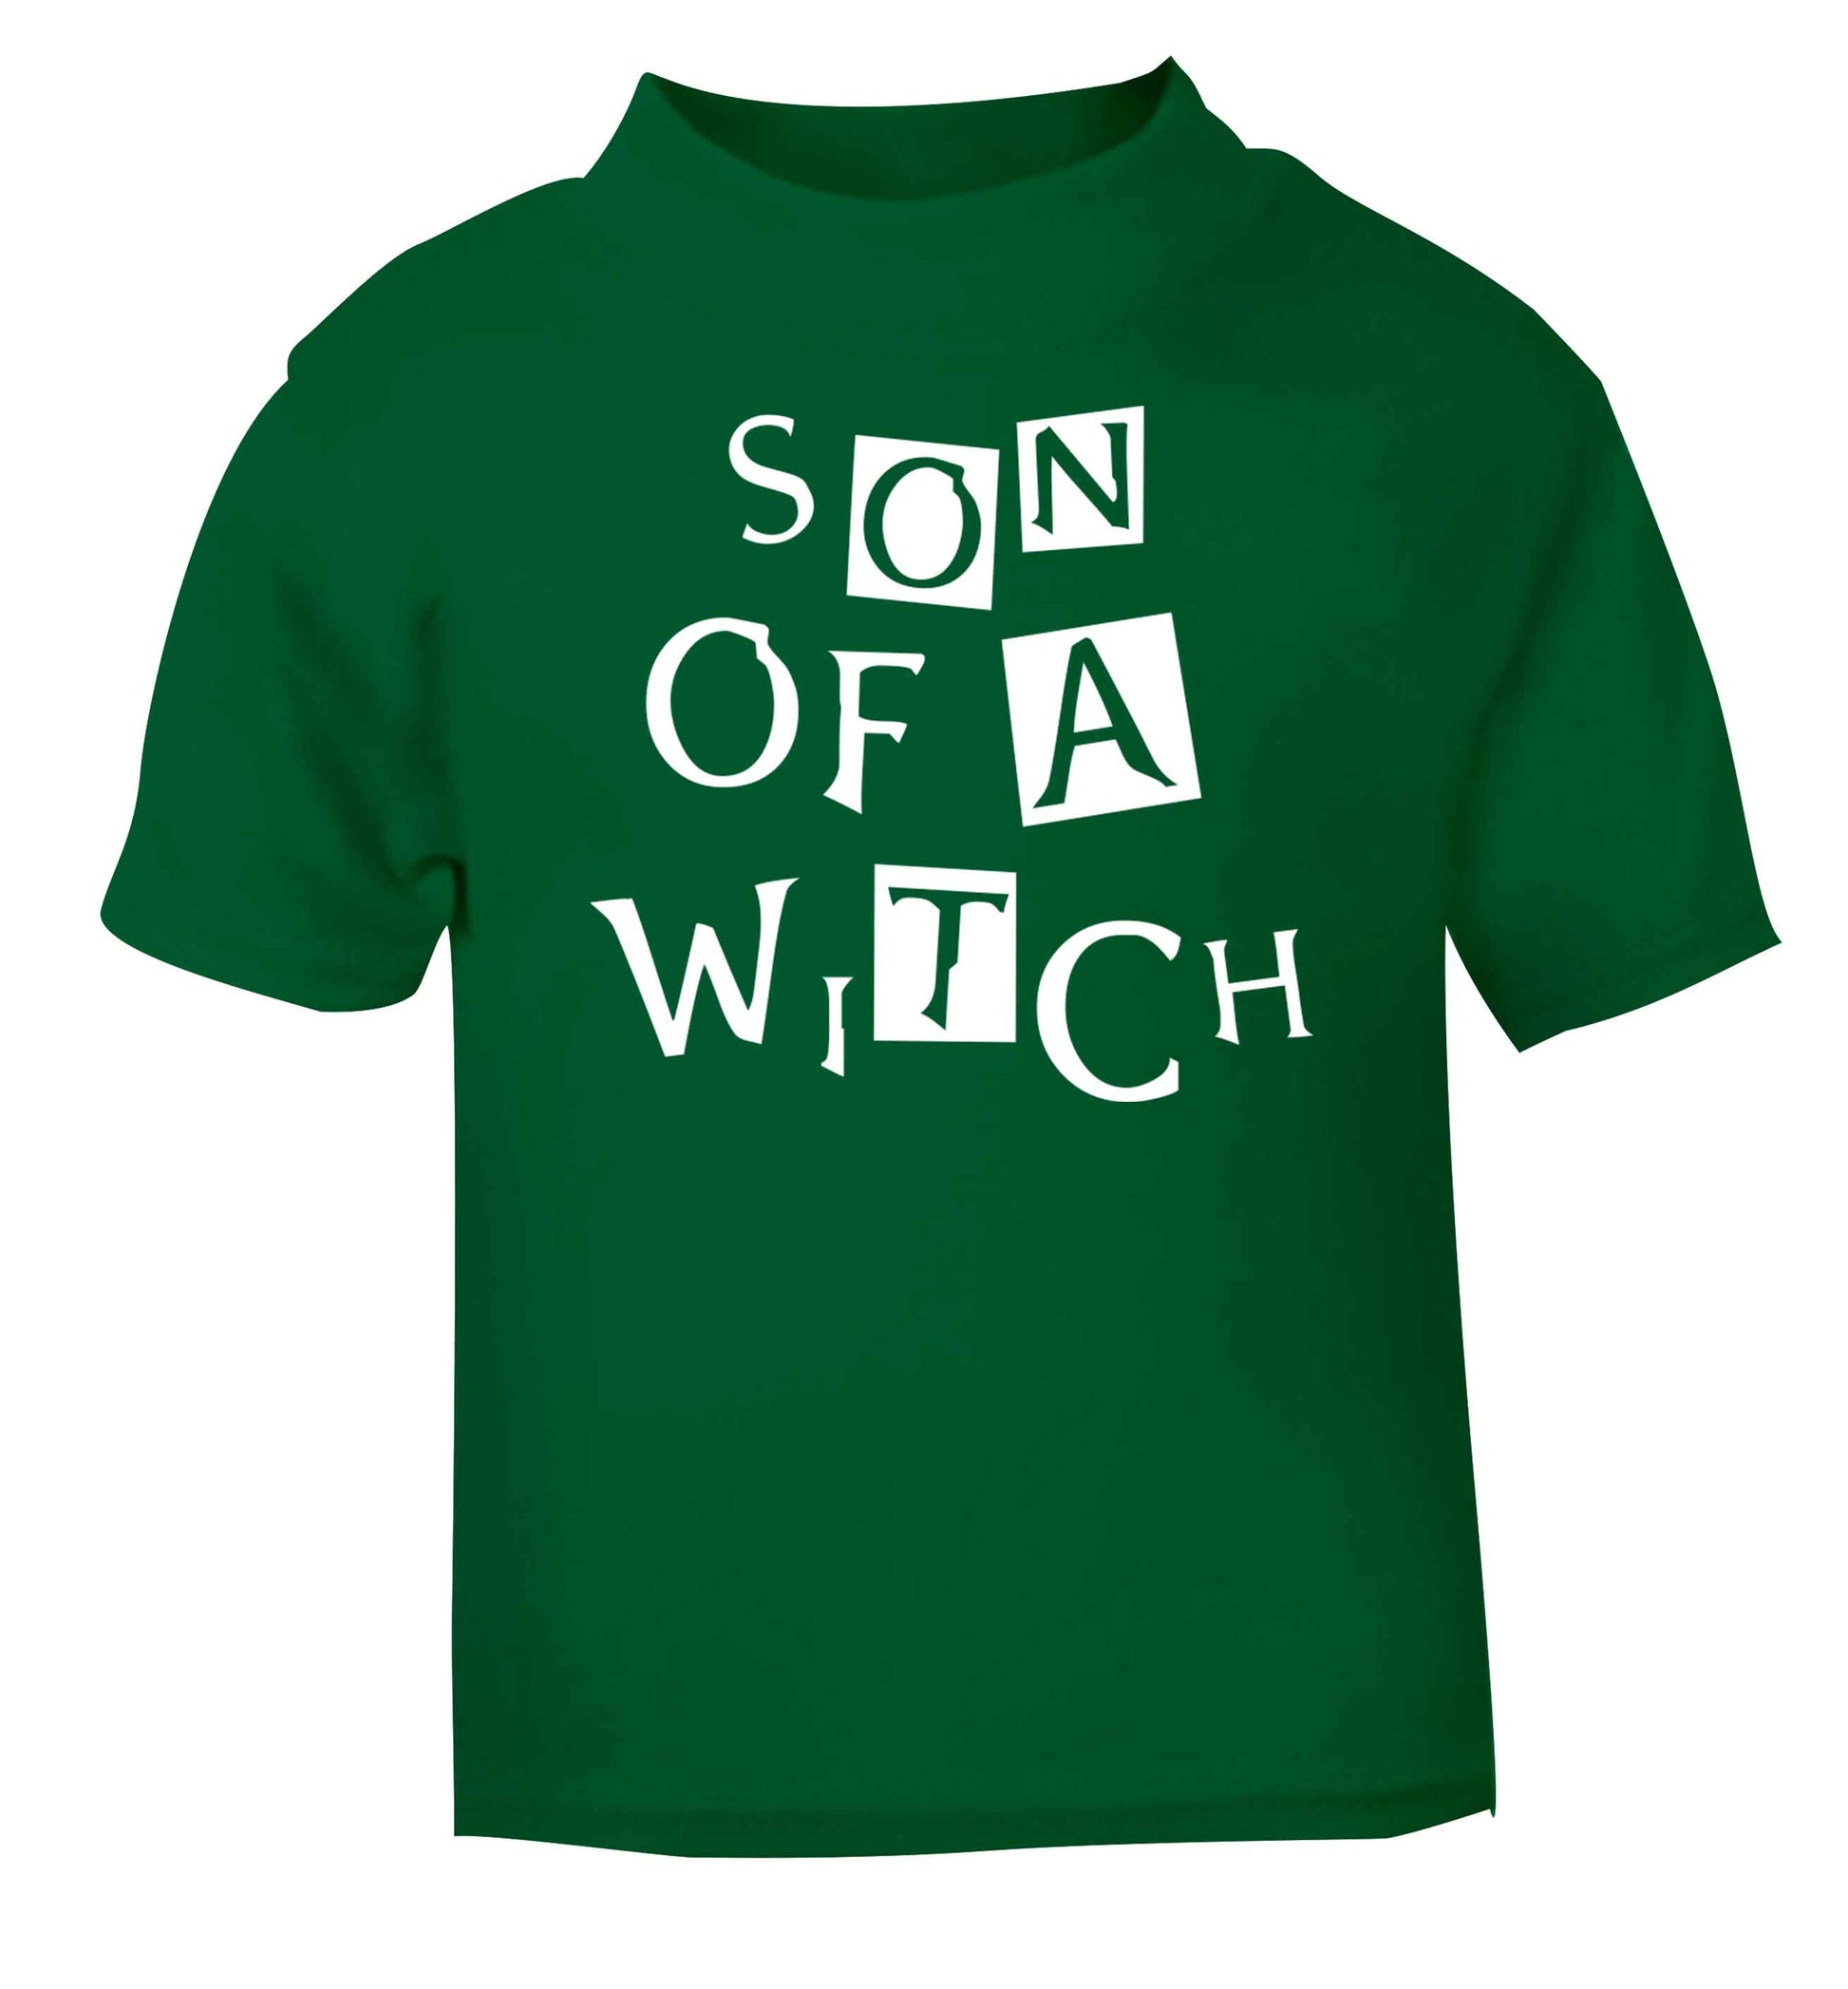 Son of a witch green baby toddler Tshirt 2 Years